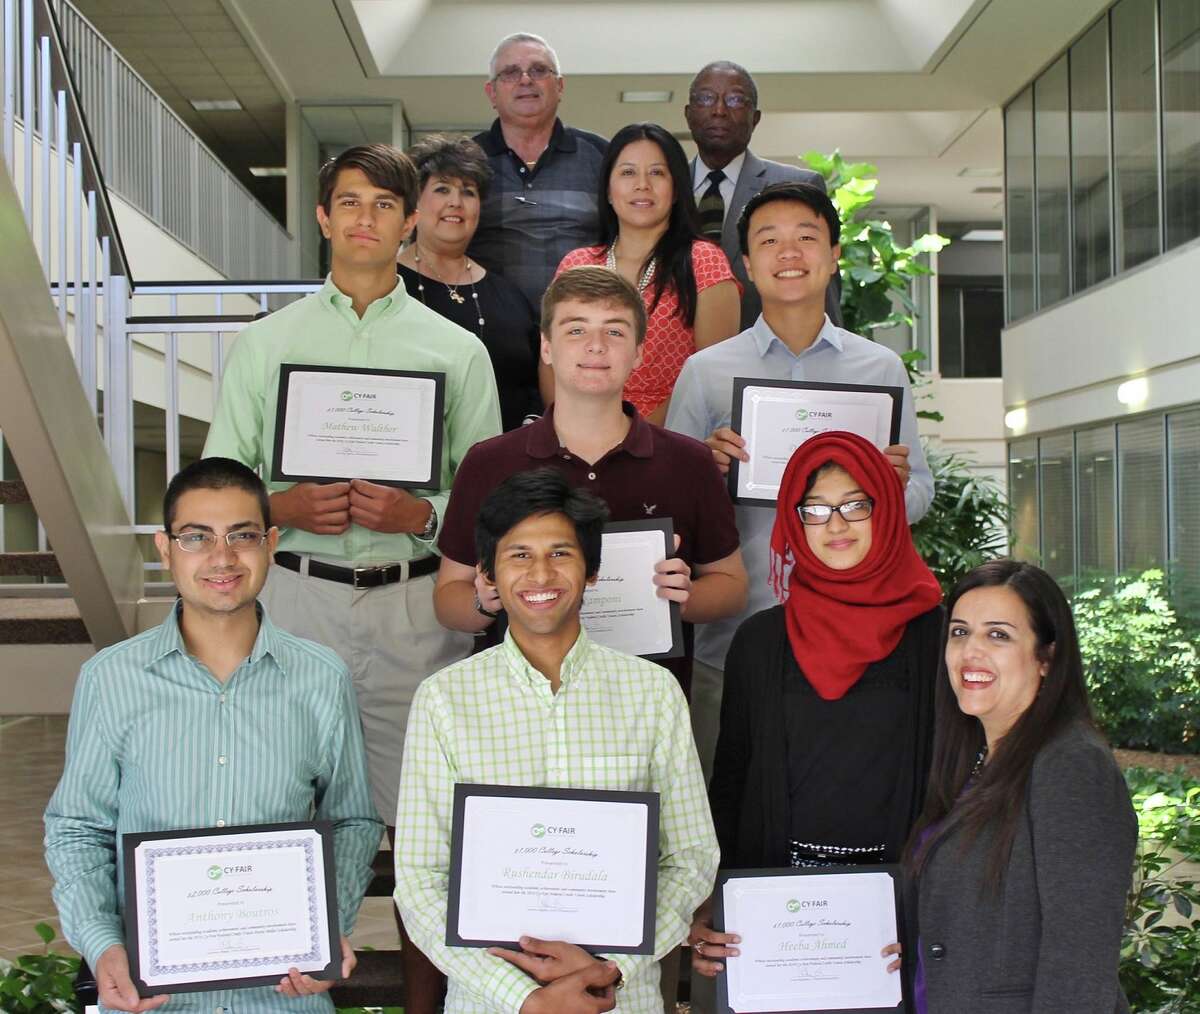 Cy-Fair Federal Credit Union representatives congratulate the 2016 winners of its scholarship program. In front are scholarship winners Anthony Boutros, left, Rushendar Birudala and Heeba Ahmed; and credit union employee Georgette Salazar. In the second row are scholarship winners Mathew Walther, left, Alex Ramponi and David Zhou. In the third row are scholarship committee members Alice Wimberly, left, and Celina Lapidus. Behind them are scholarship committee members Tony Barcelona III, left, and Isiah Spikes.